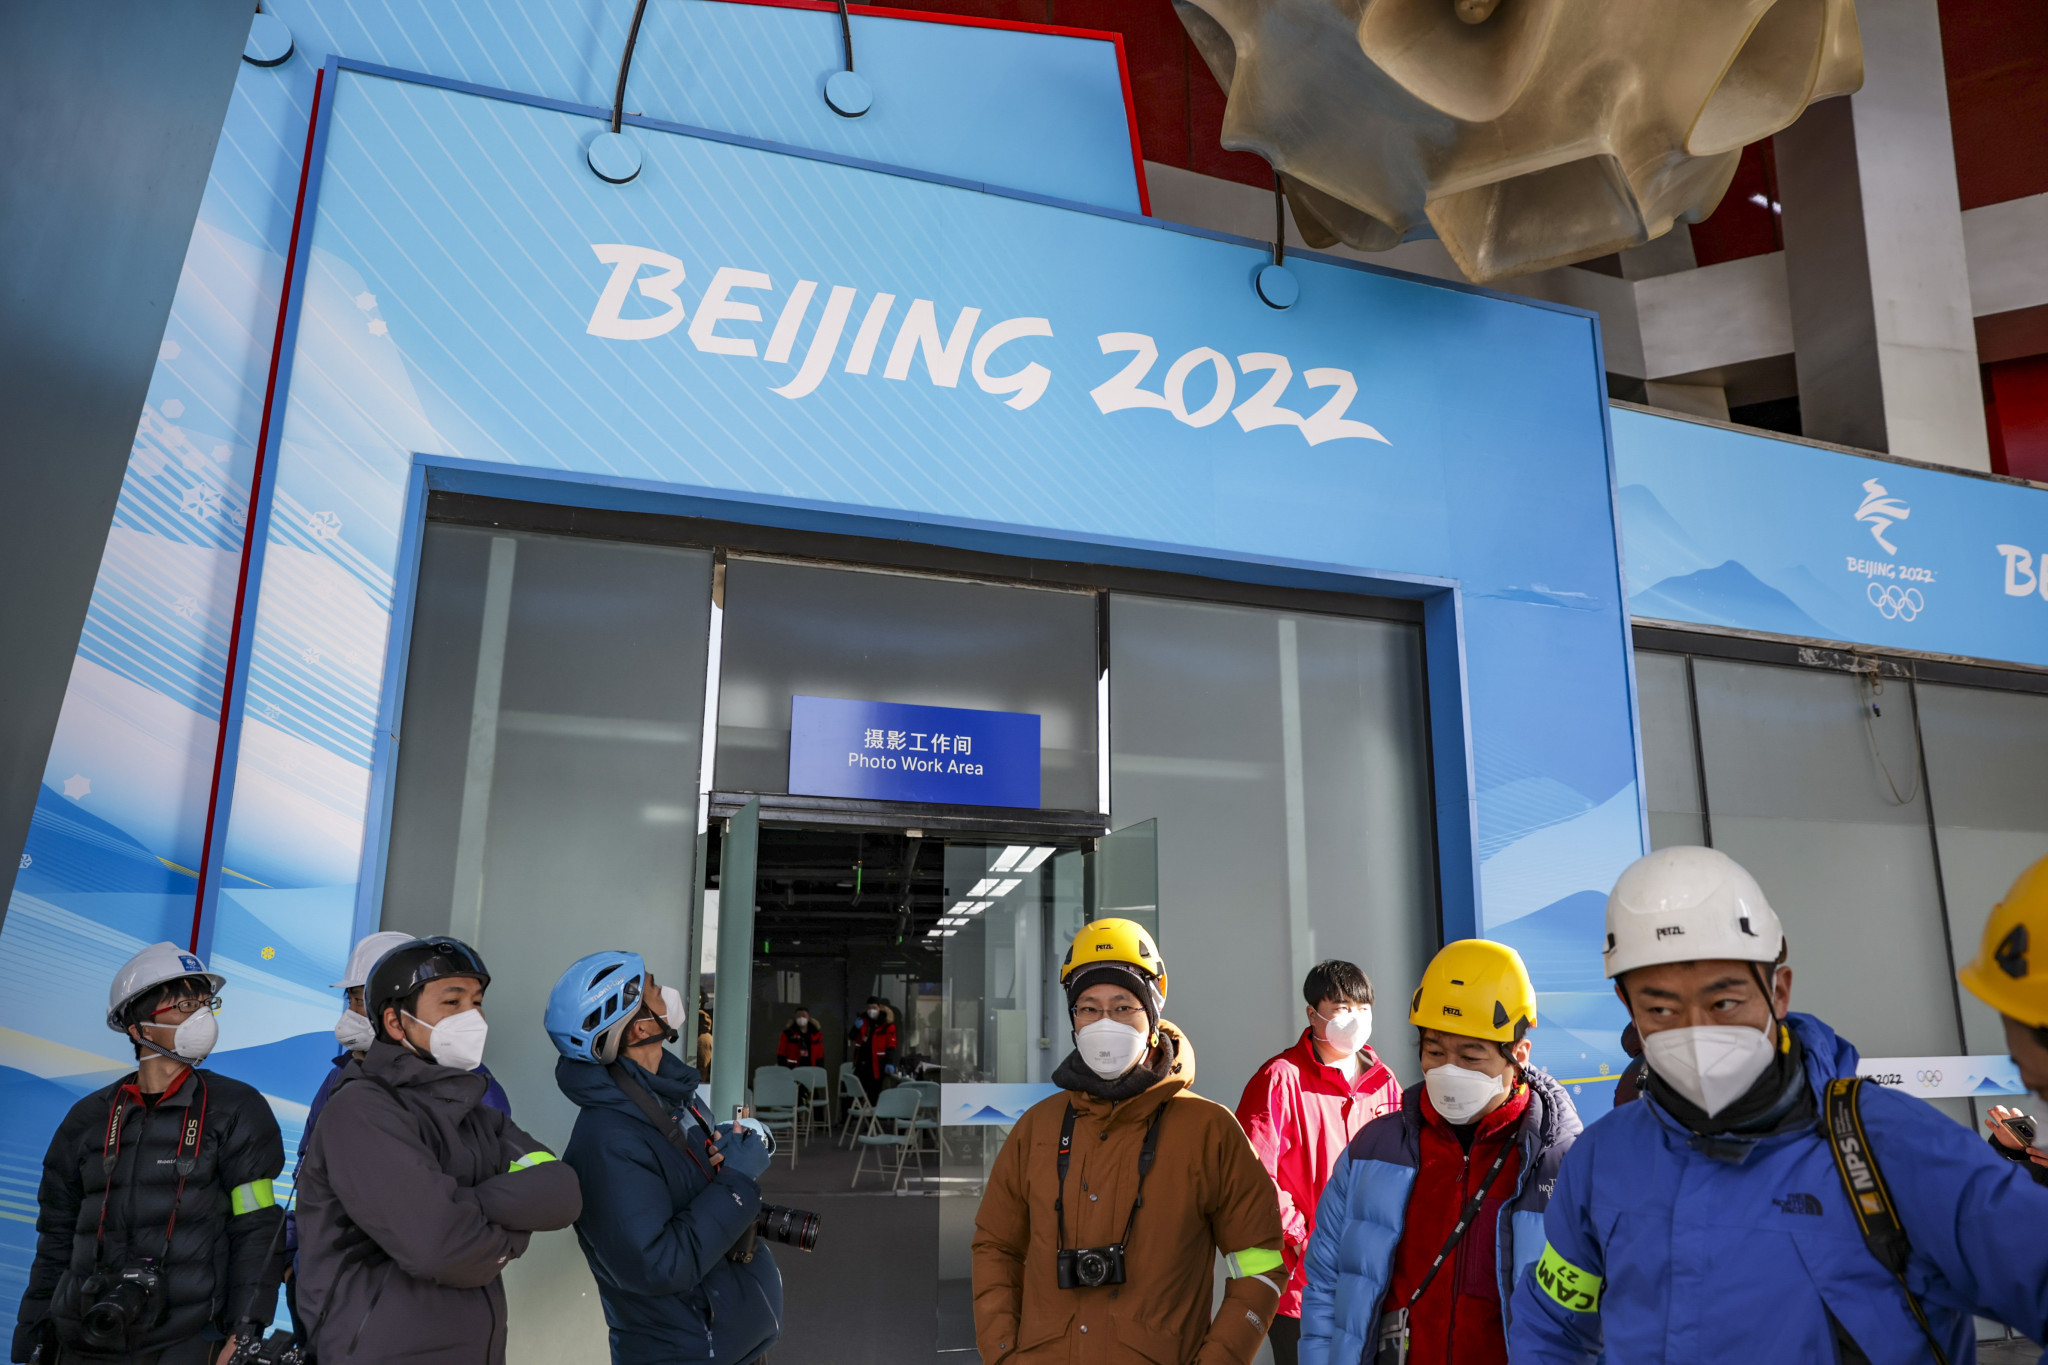 Beijing 2022 Paralympic facilities have met all accessibility requirements, official claims